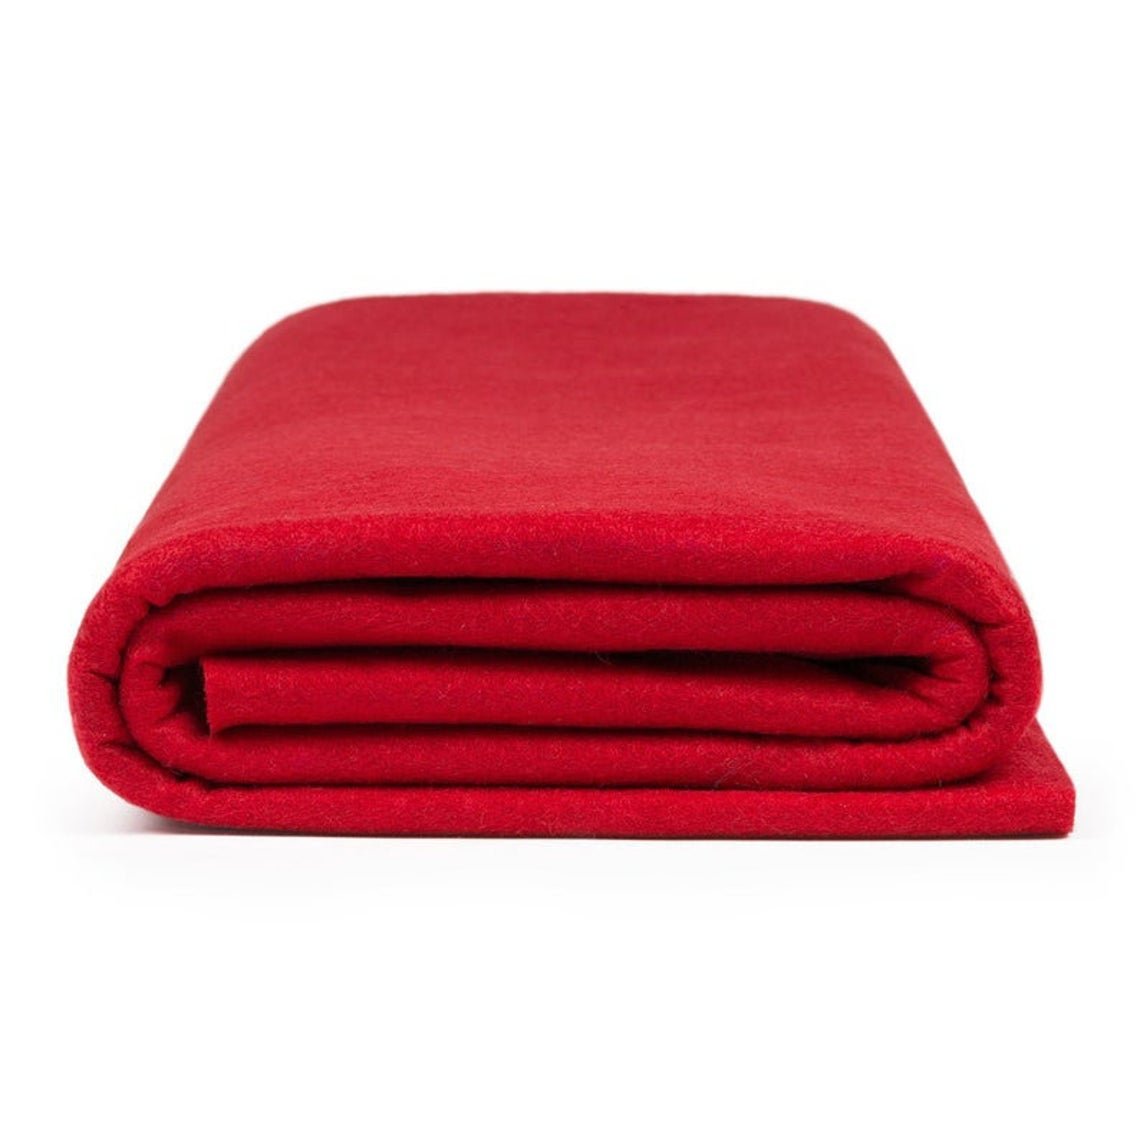 72" Wide 1.6 mm Thick Acrylic Red Felt Fabric By The YardICE FABRICSICE FABRICSPer Yard1.6mm Thick72" Wide 1.6 mm Thick Acrylic Red Felt Fabric By The Yard ICE FABRICS